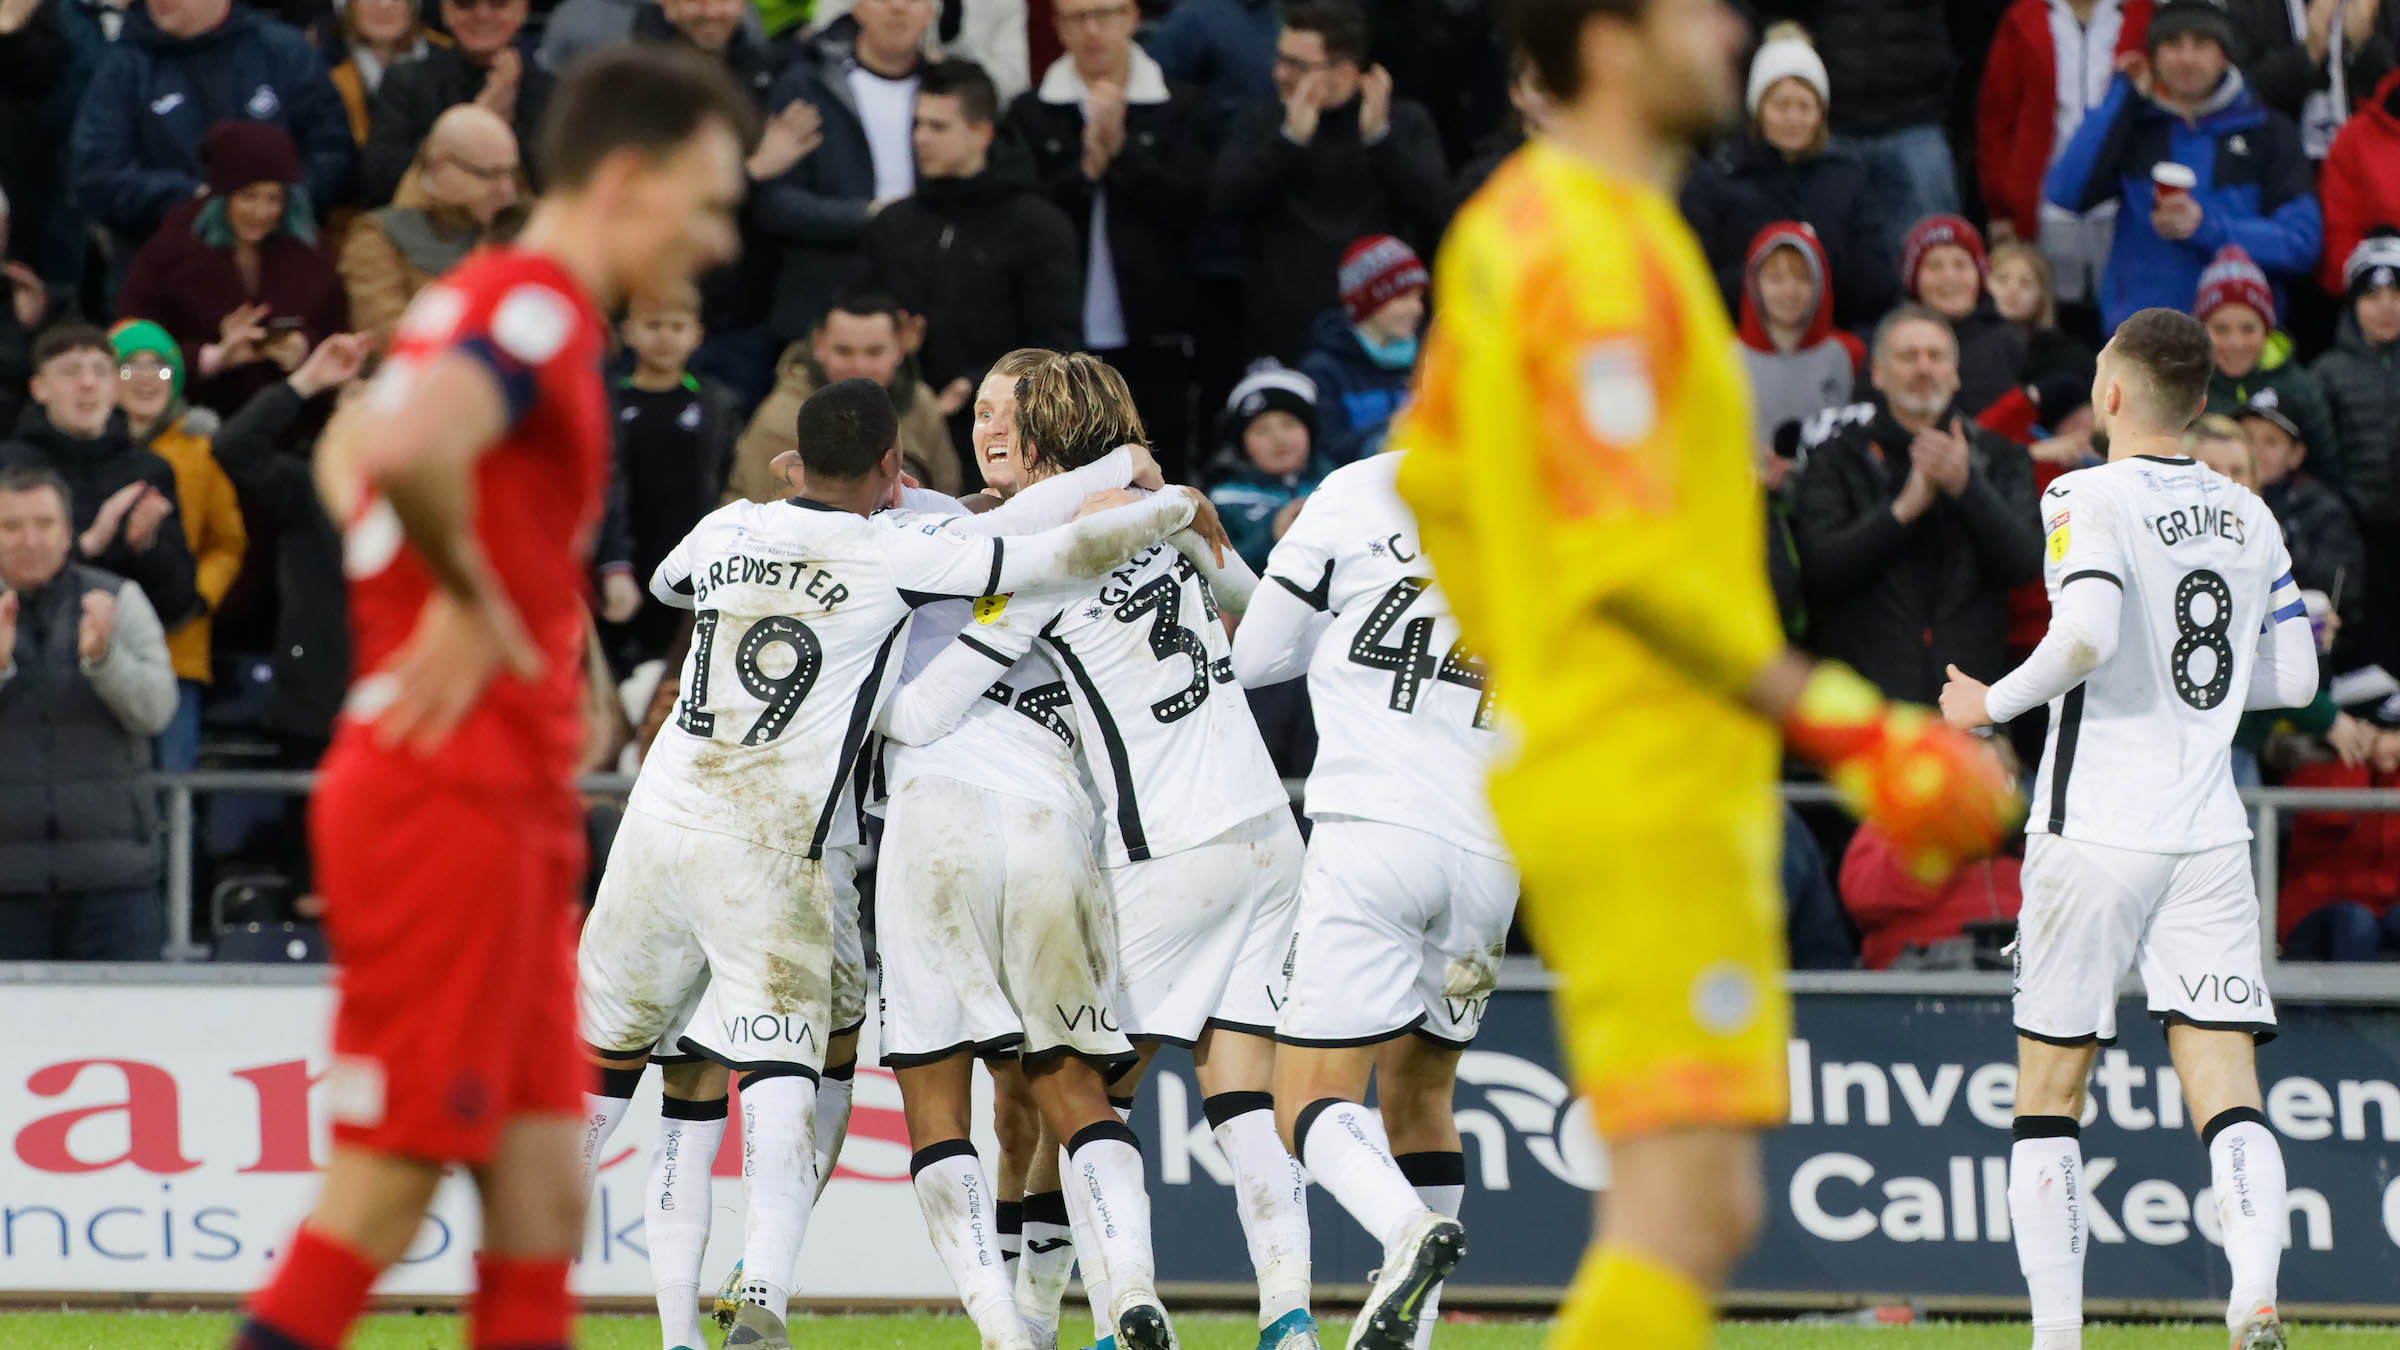 The Swans squad celebrate a goal